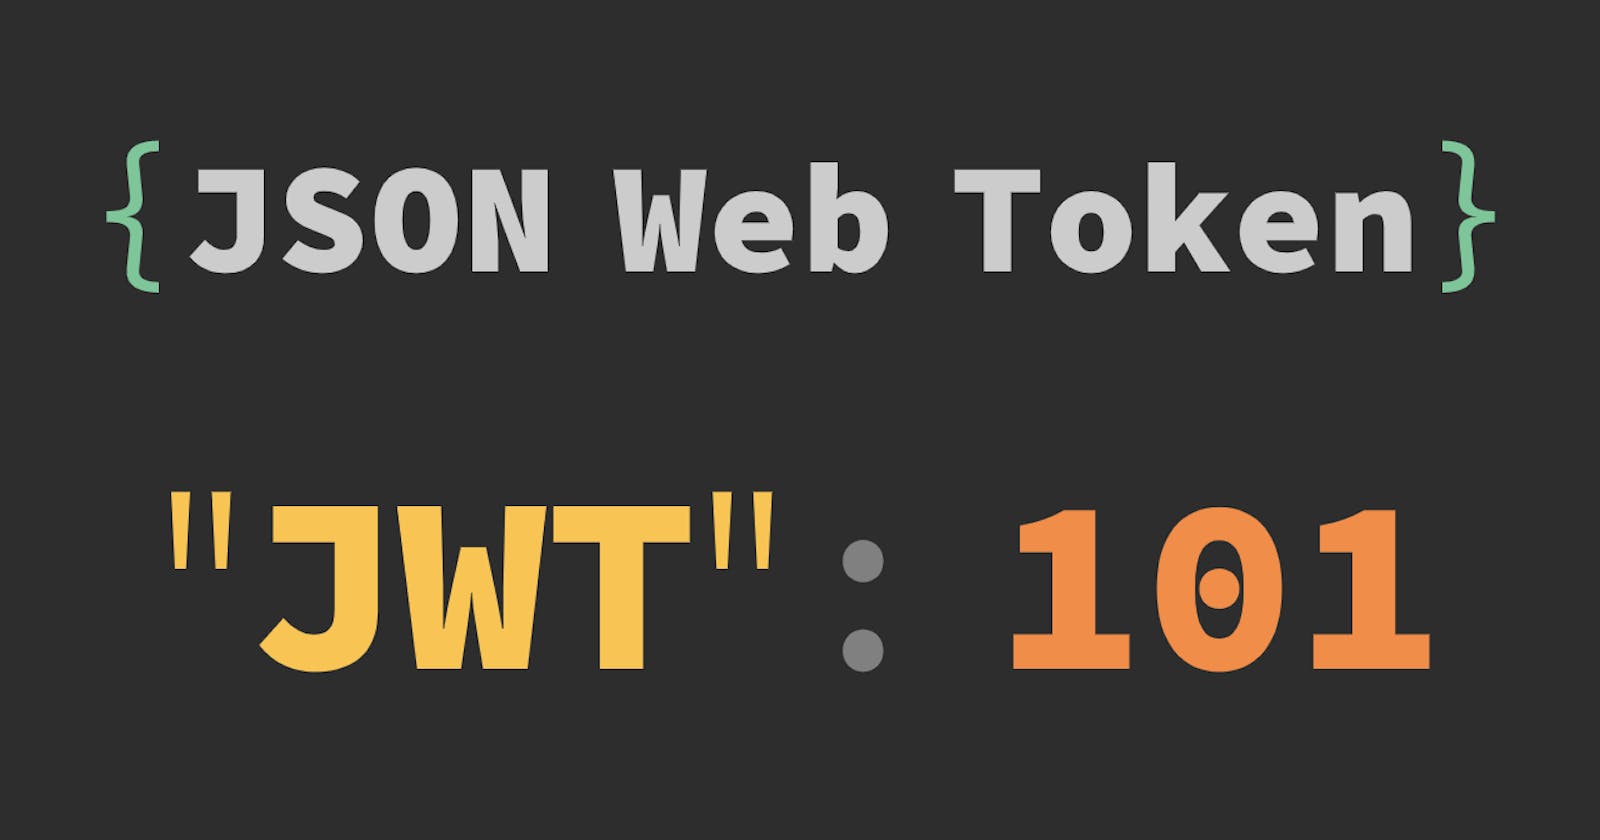 Revoking Access to JWT tokens with a Blacklist